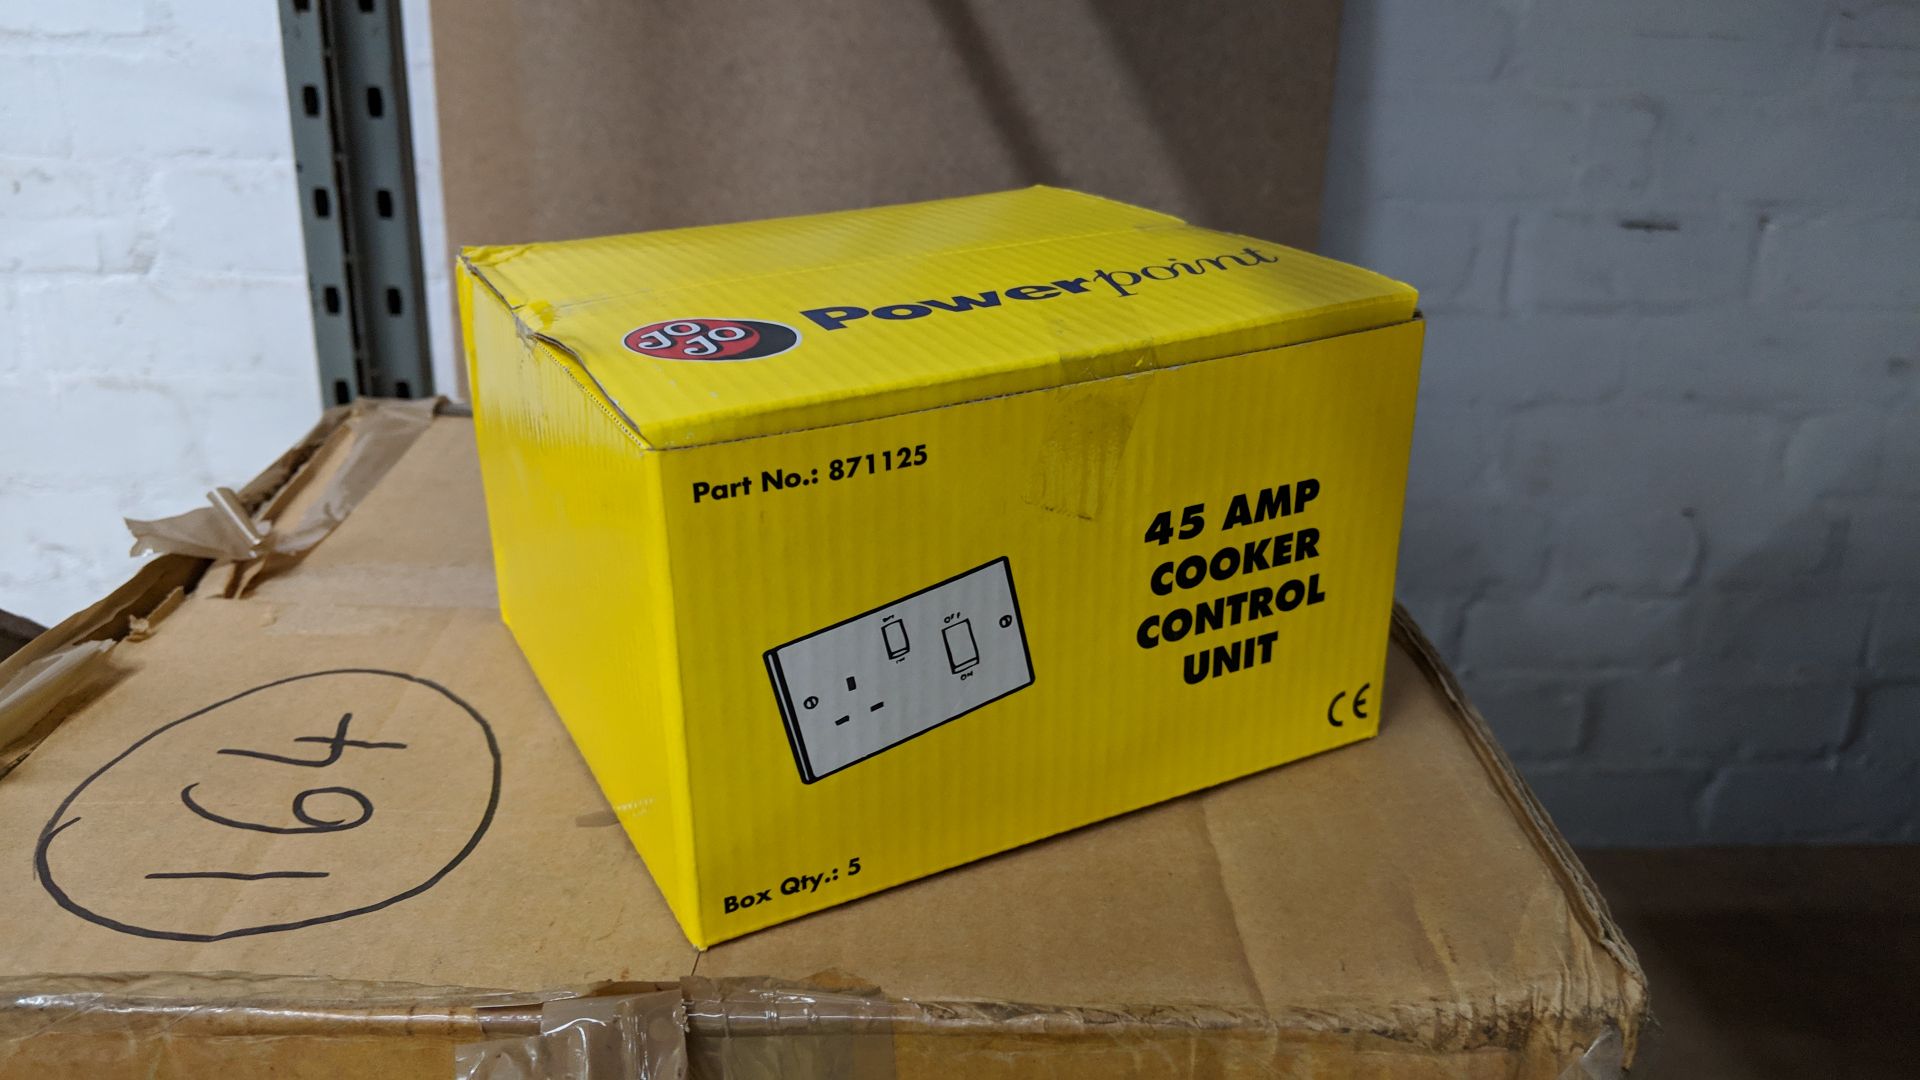 80 off Jojo Powerpoint 45amp cooker control units This lot is one of a number of lots in this sale - Image 2 of 3